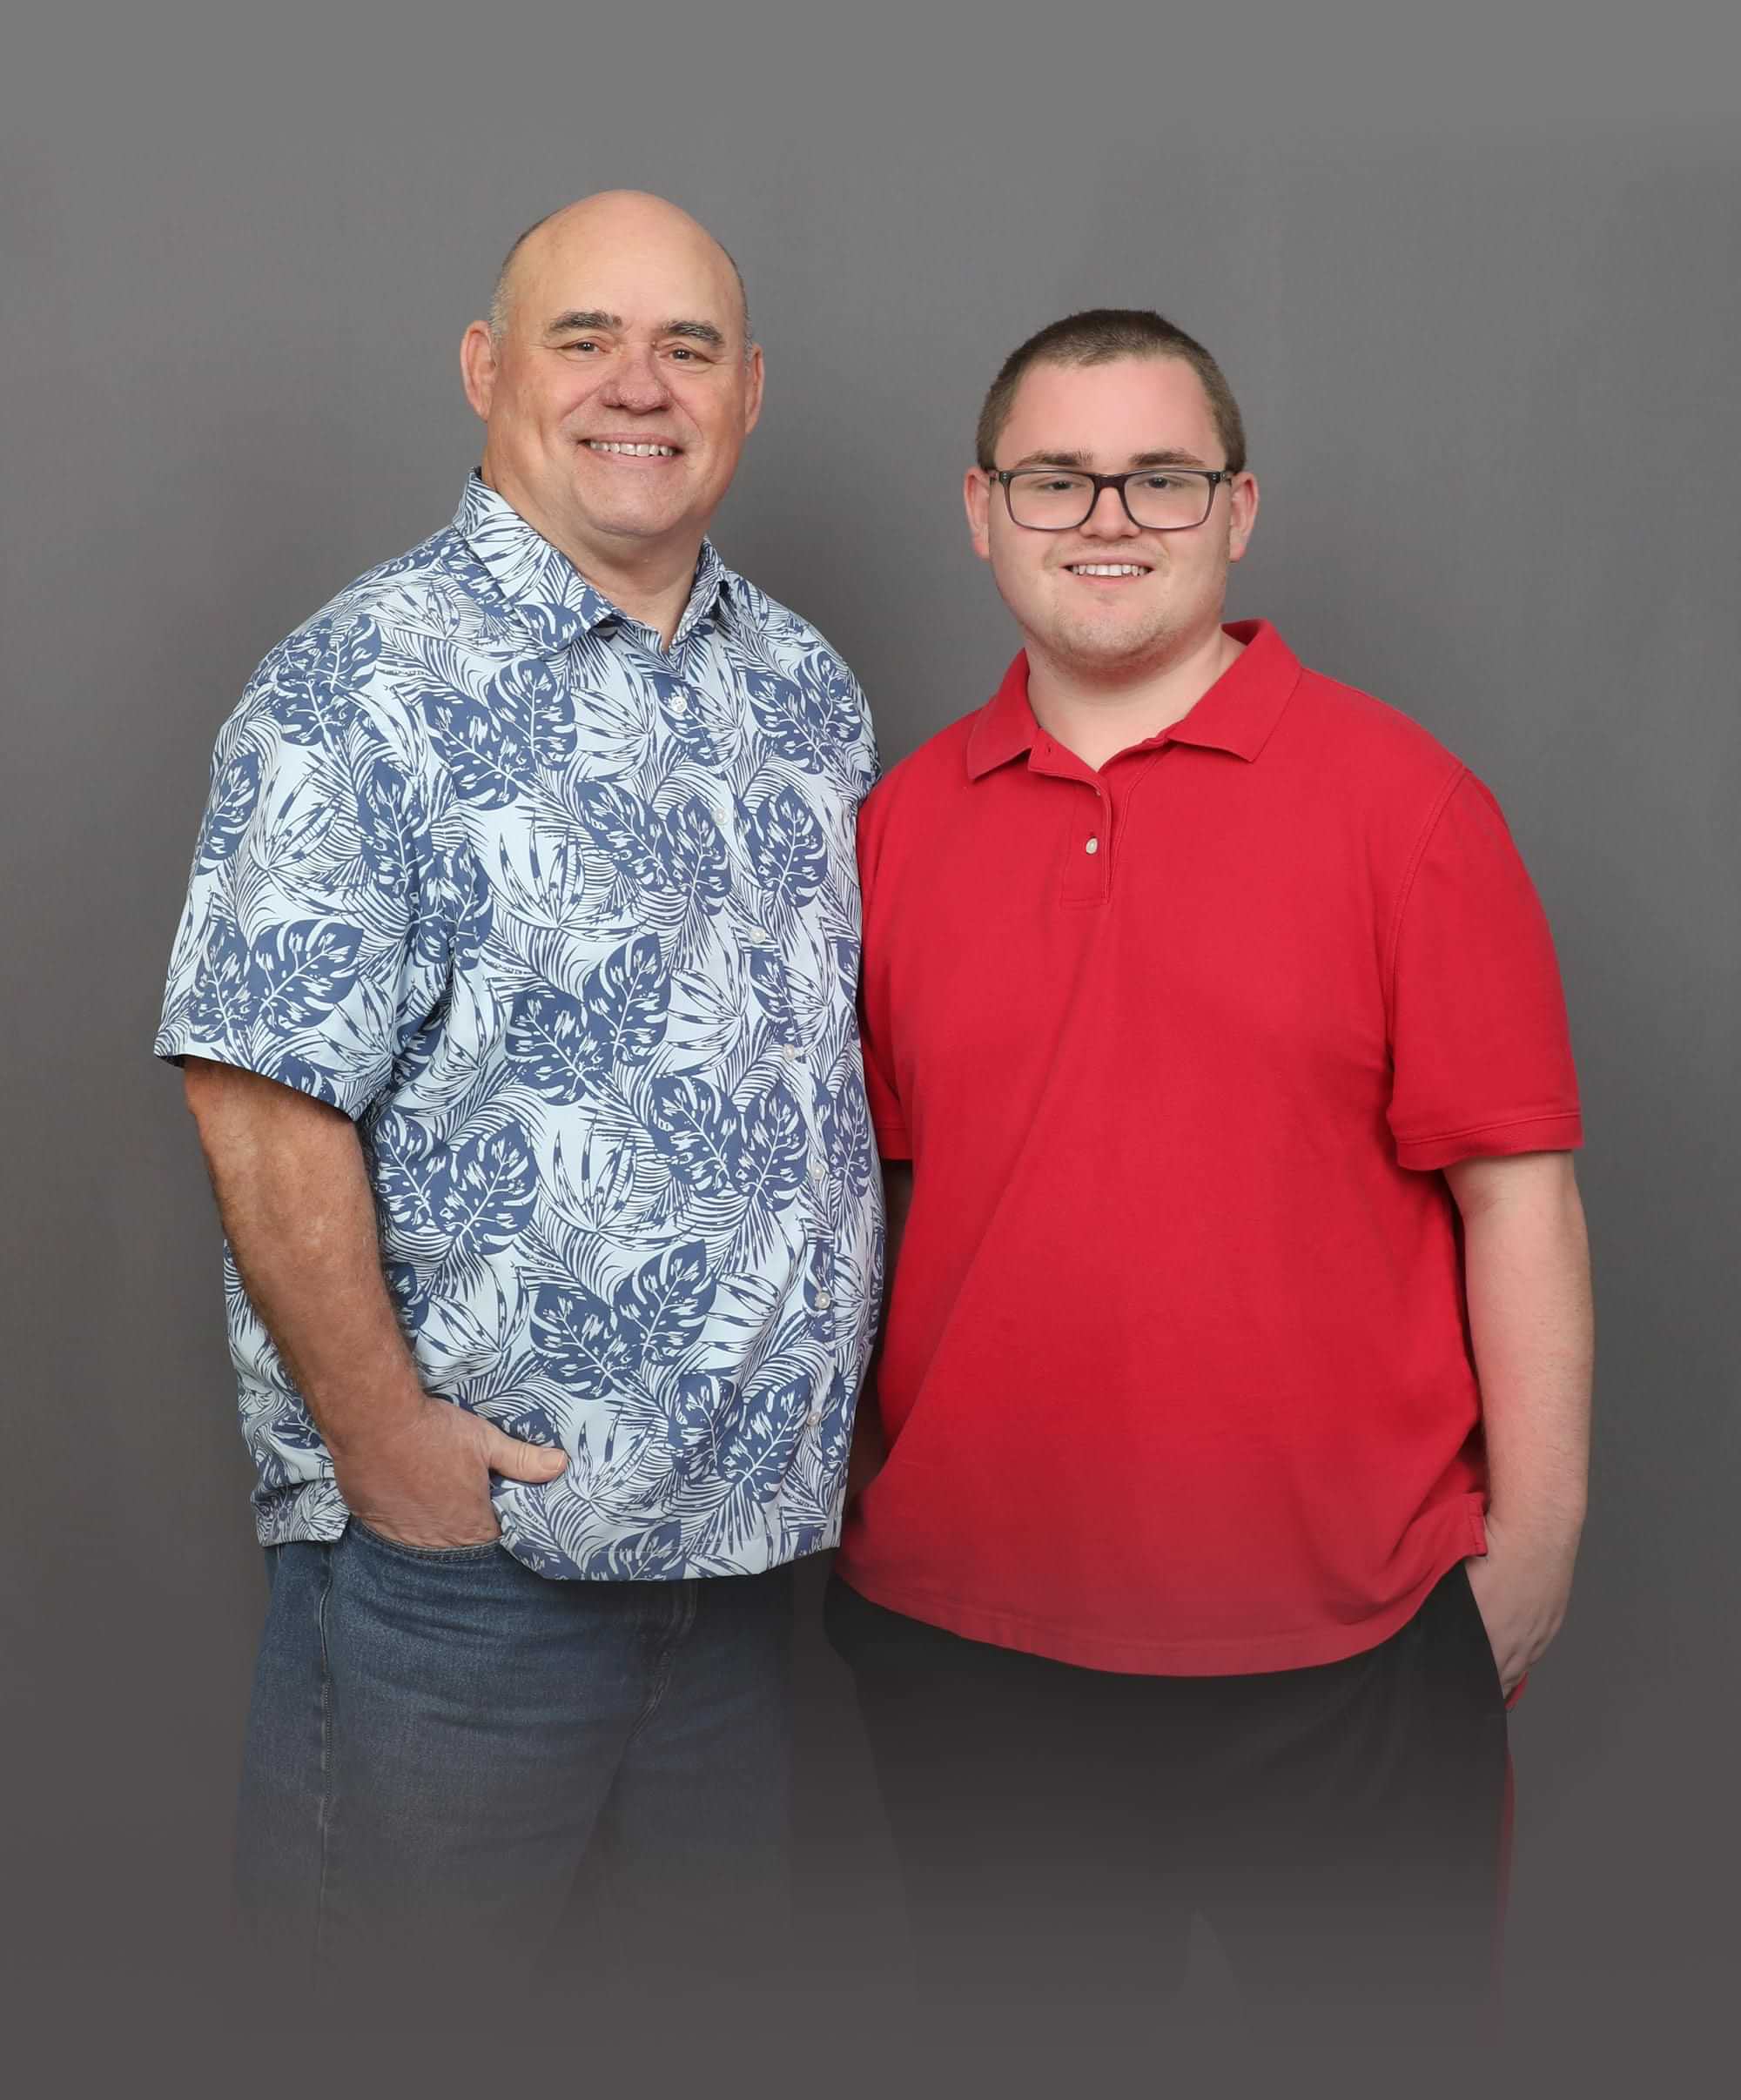 Robert Brown wears a blue monstera patterned short sleeve button down shirt and smiles while standing beside his smiling son, Joshua, who wears thick rimmed glasses and a red polo shirt